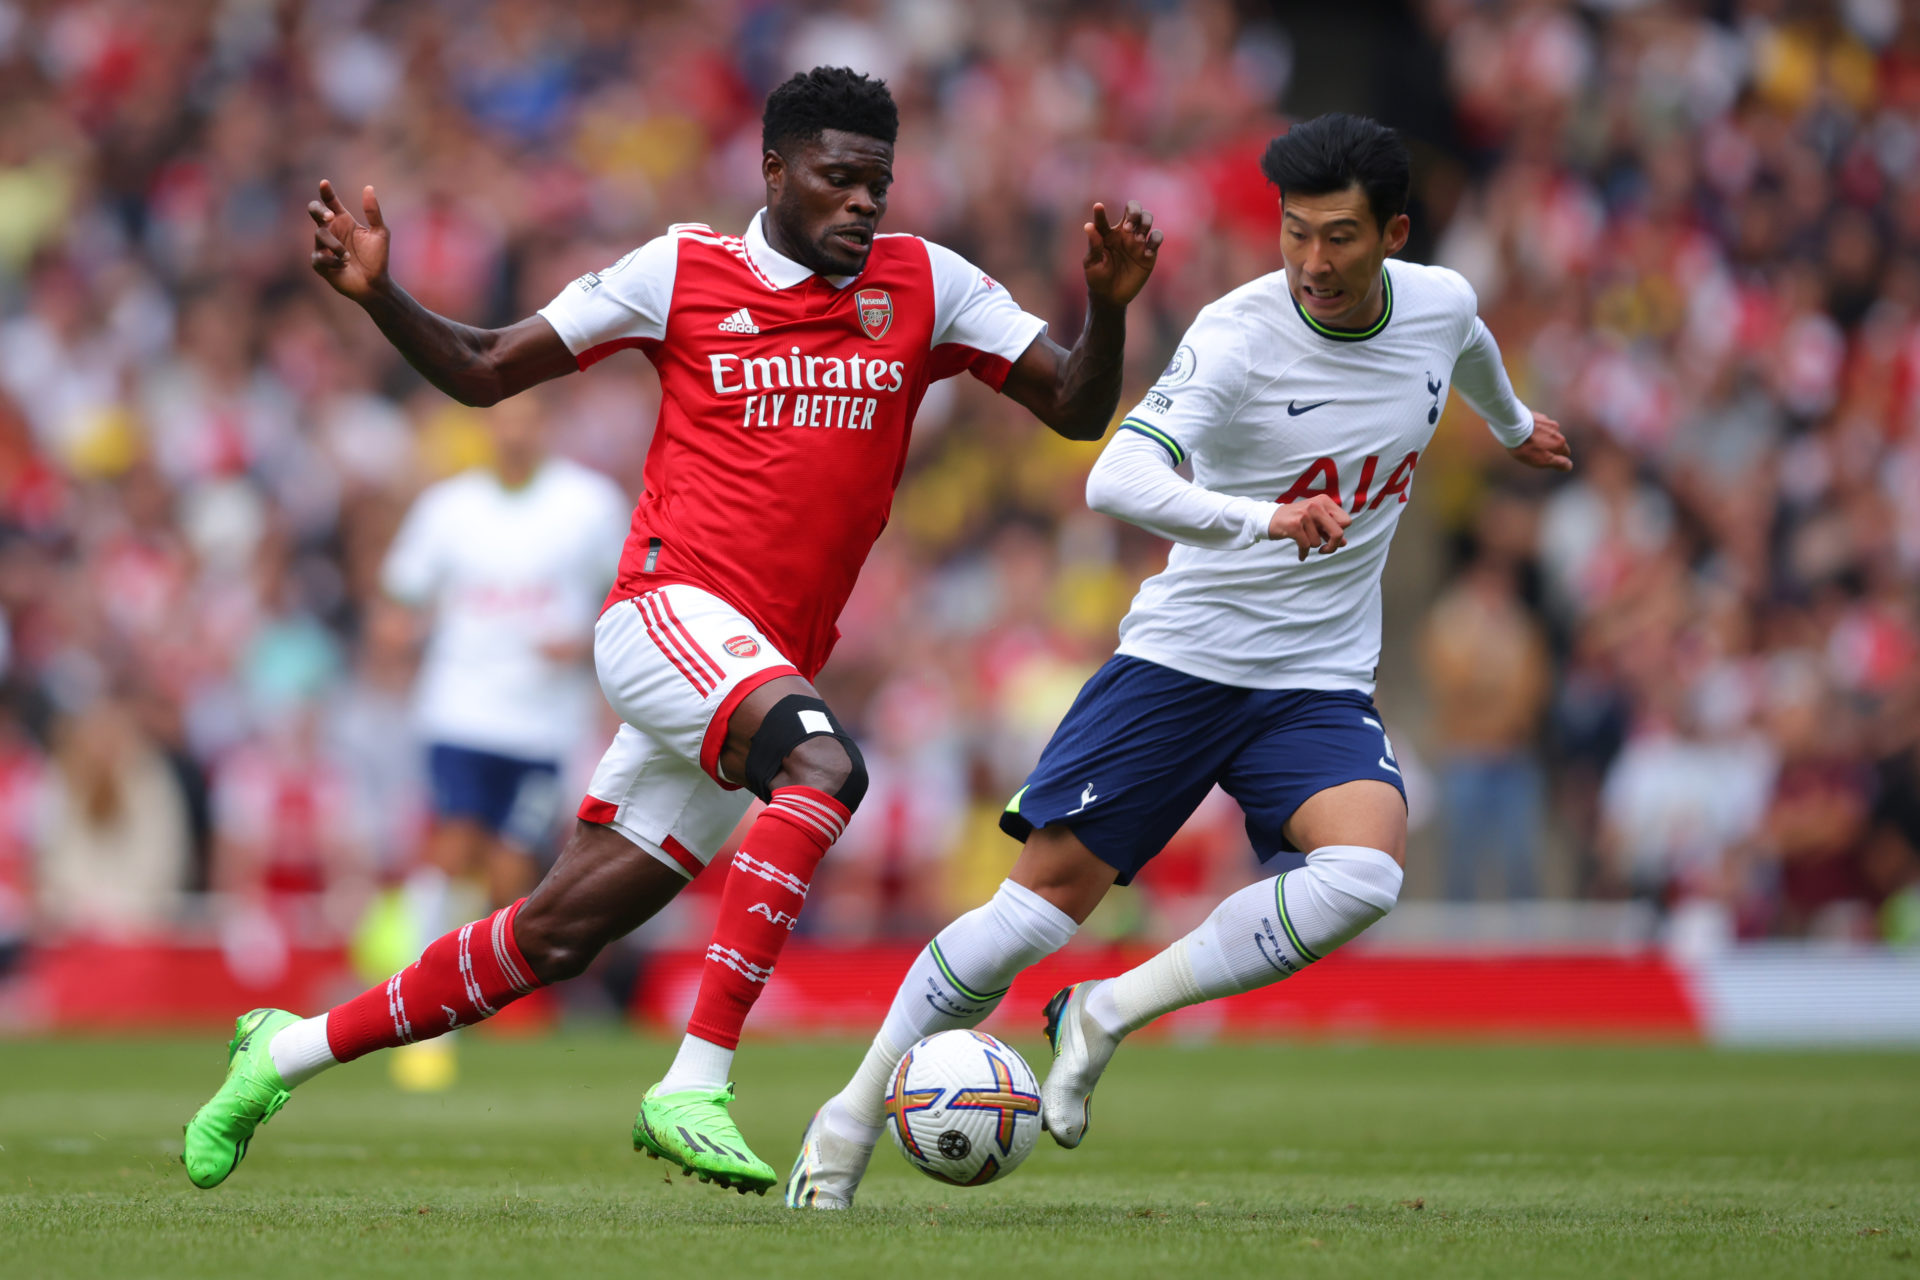 Arsenal can't rely on Thomas Partey